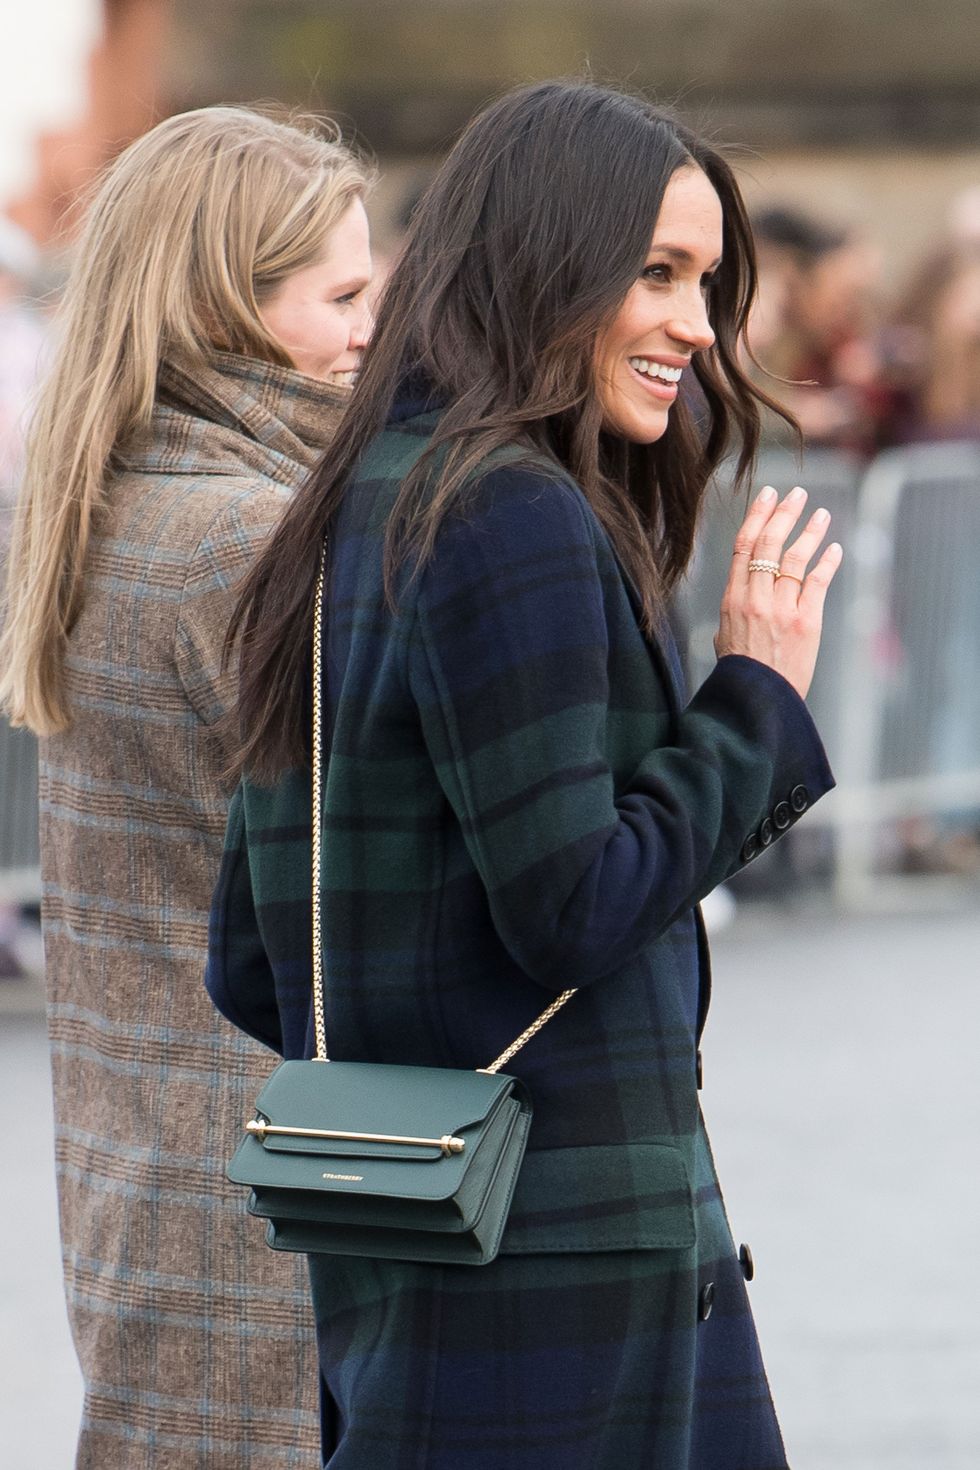 Designers behind Meghan Markle's favourite Strathberry bags reveal they're  'obsessive' Suits fans